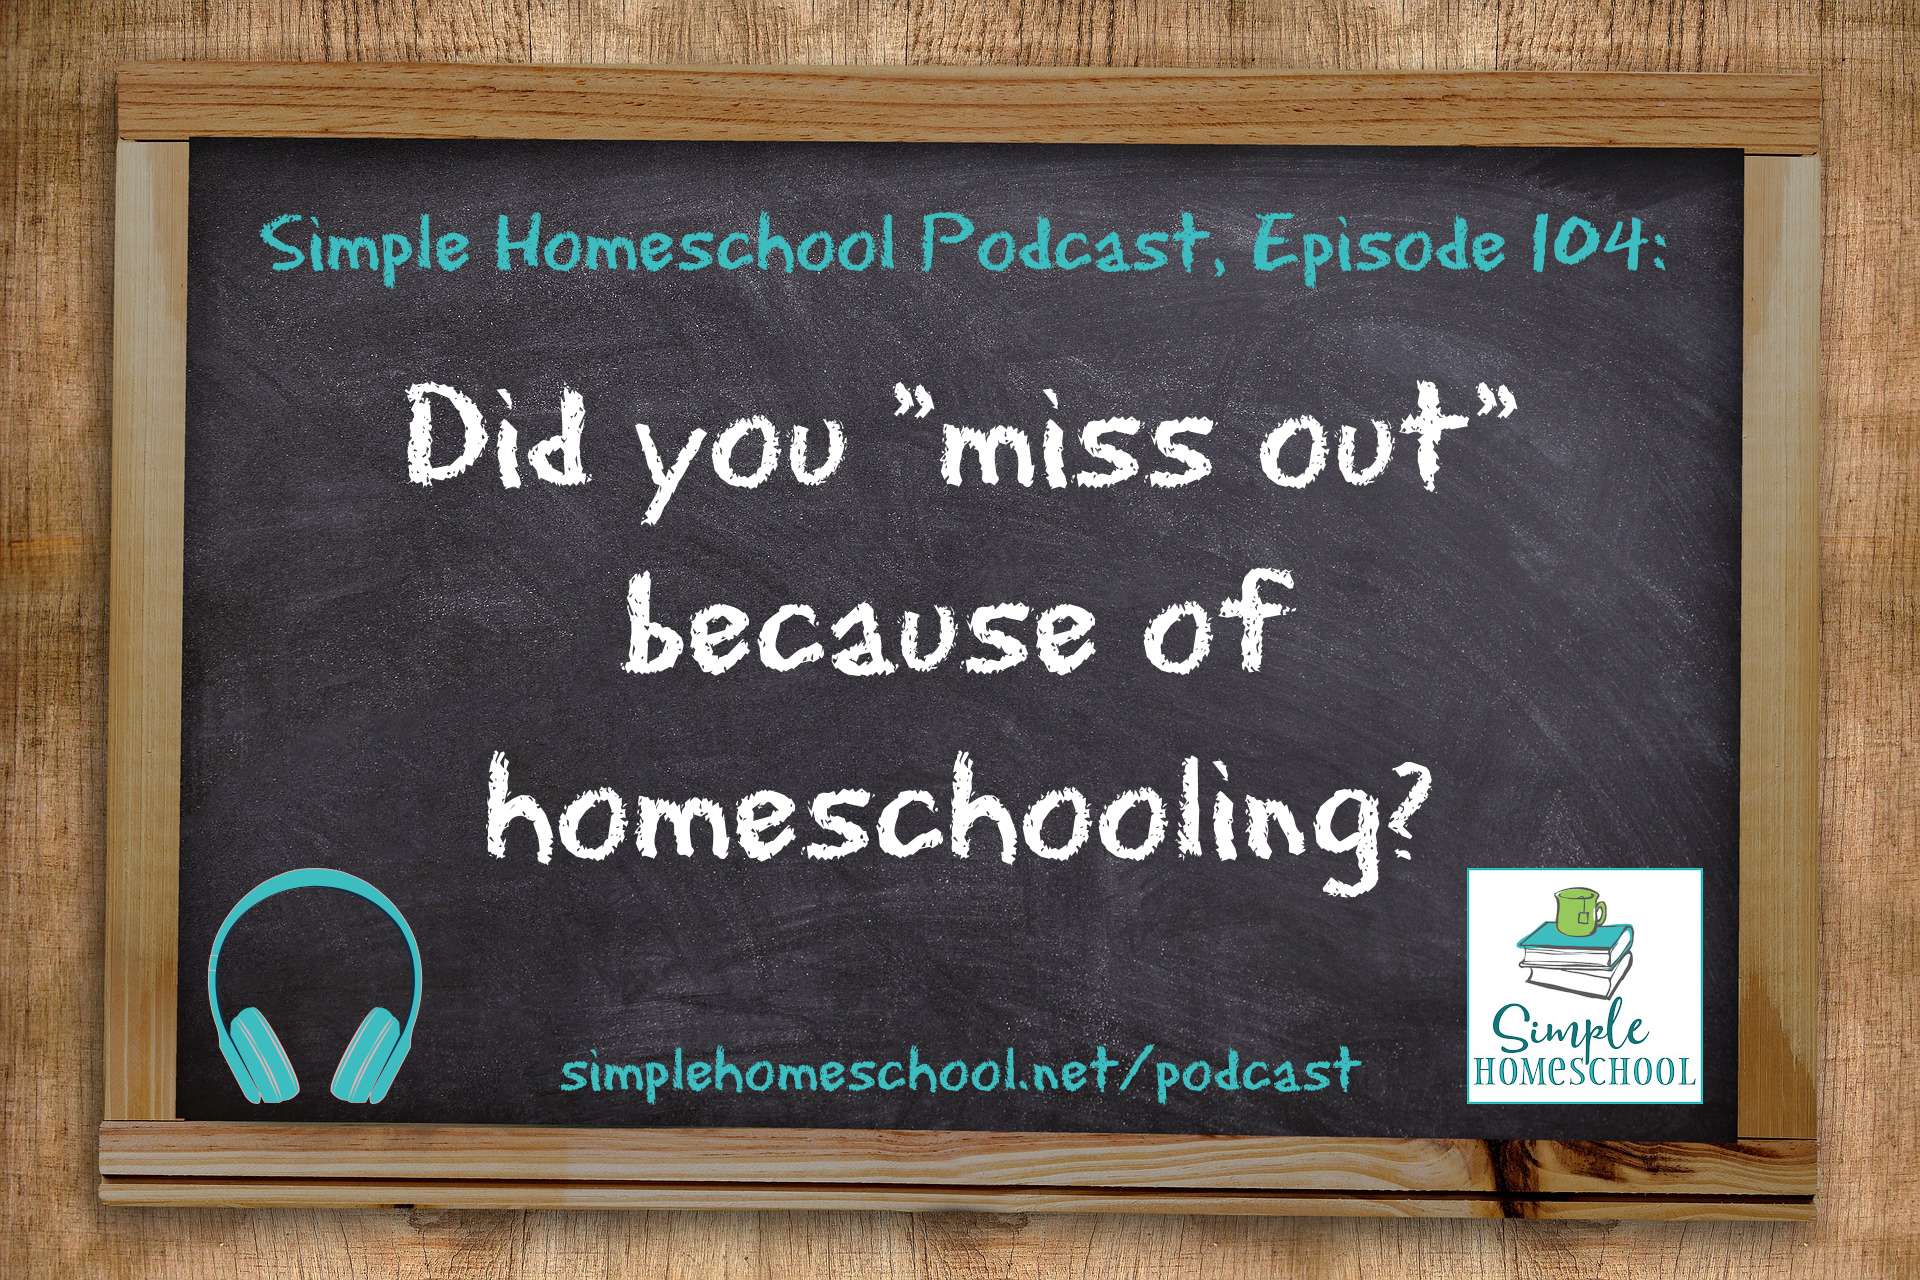 Did you "miss out" because of homeschooling?